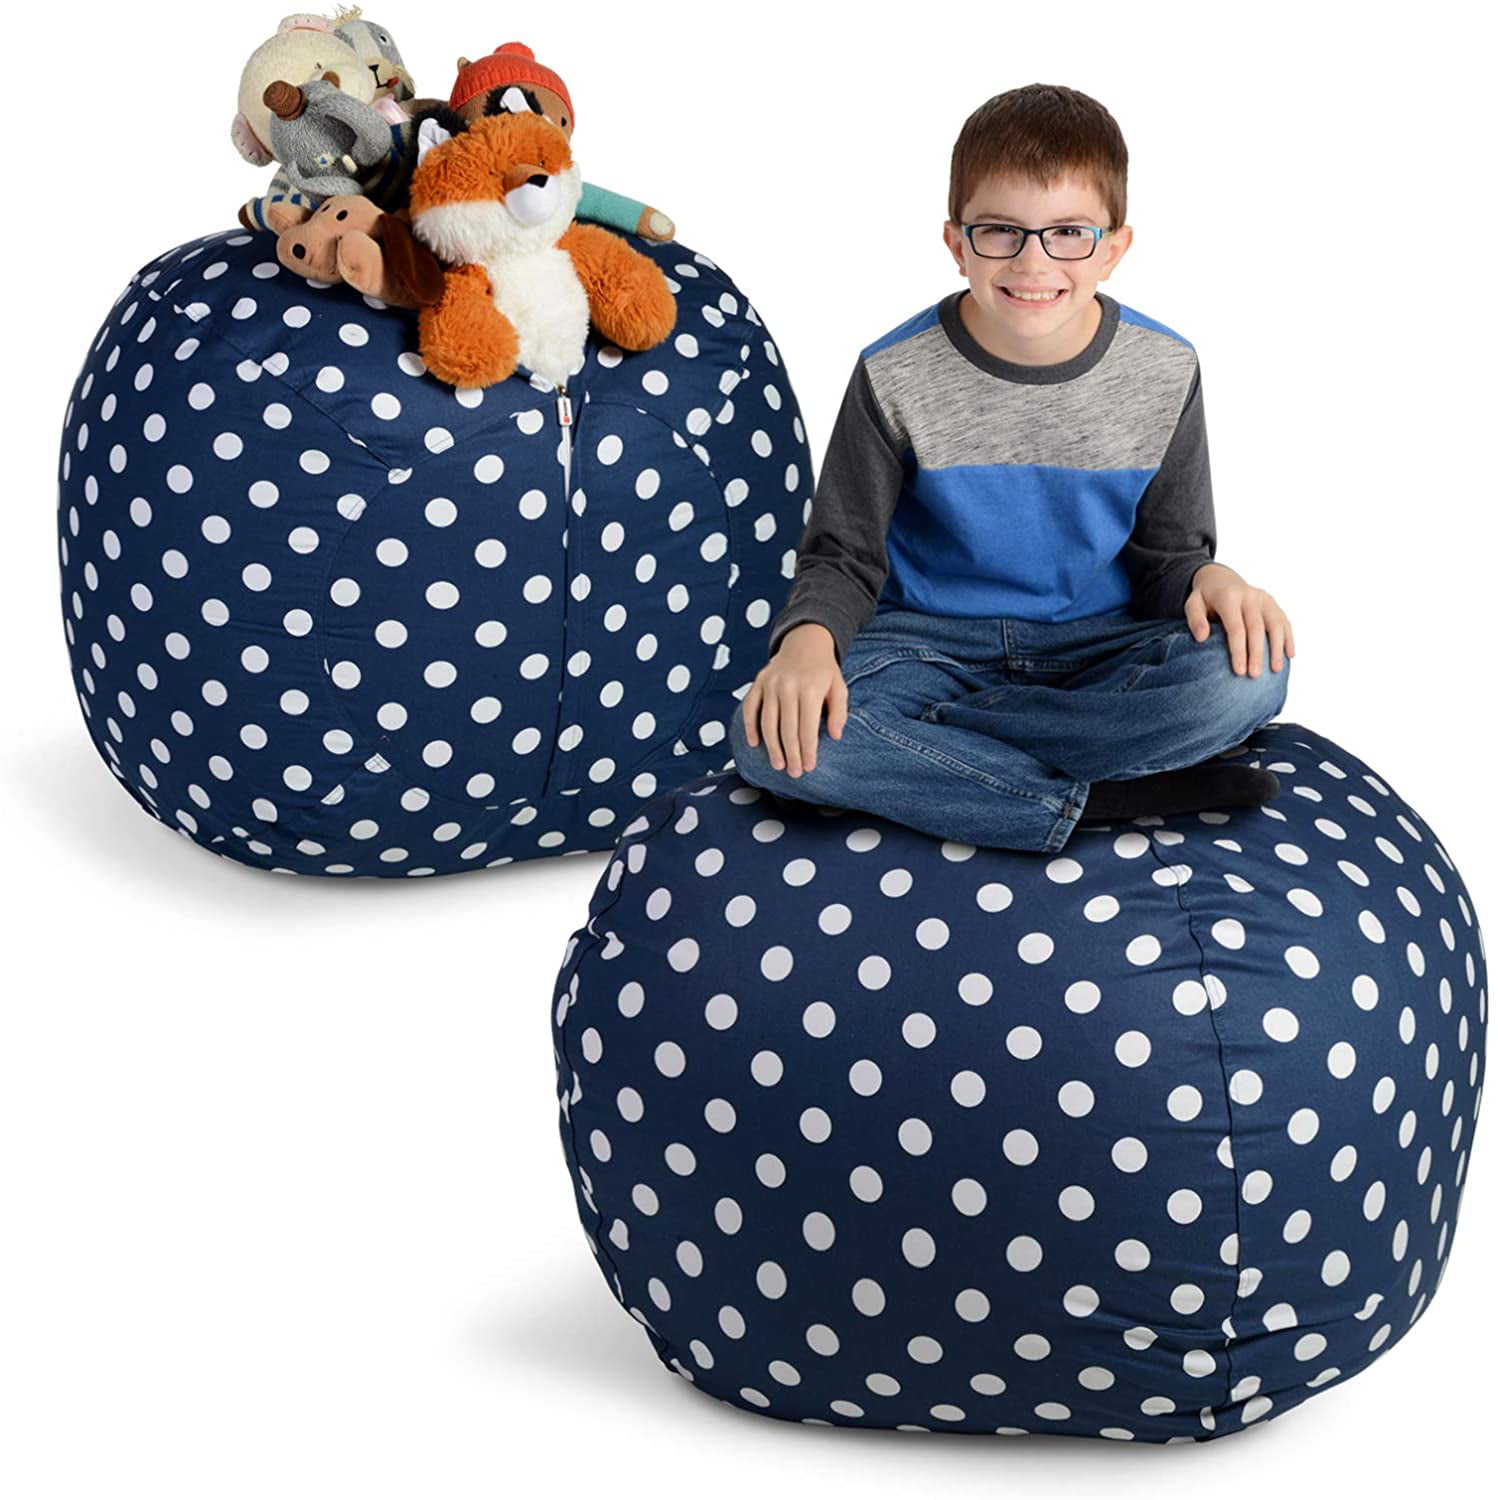 Extra Large 38" Kid's Sit Stuffed Animal Storage Bean Bag Chair with 10 Patterns 